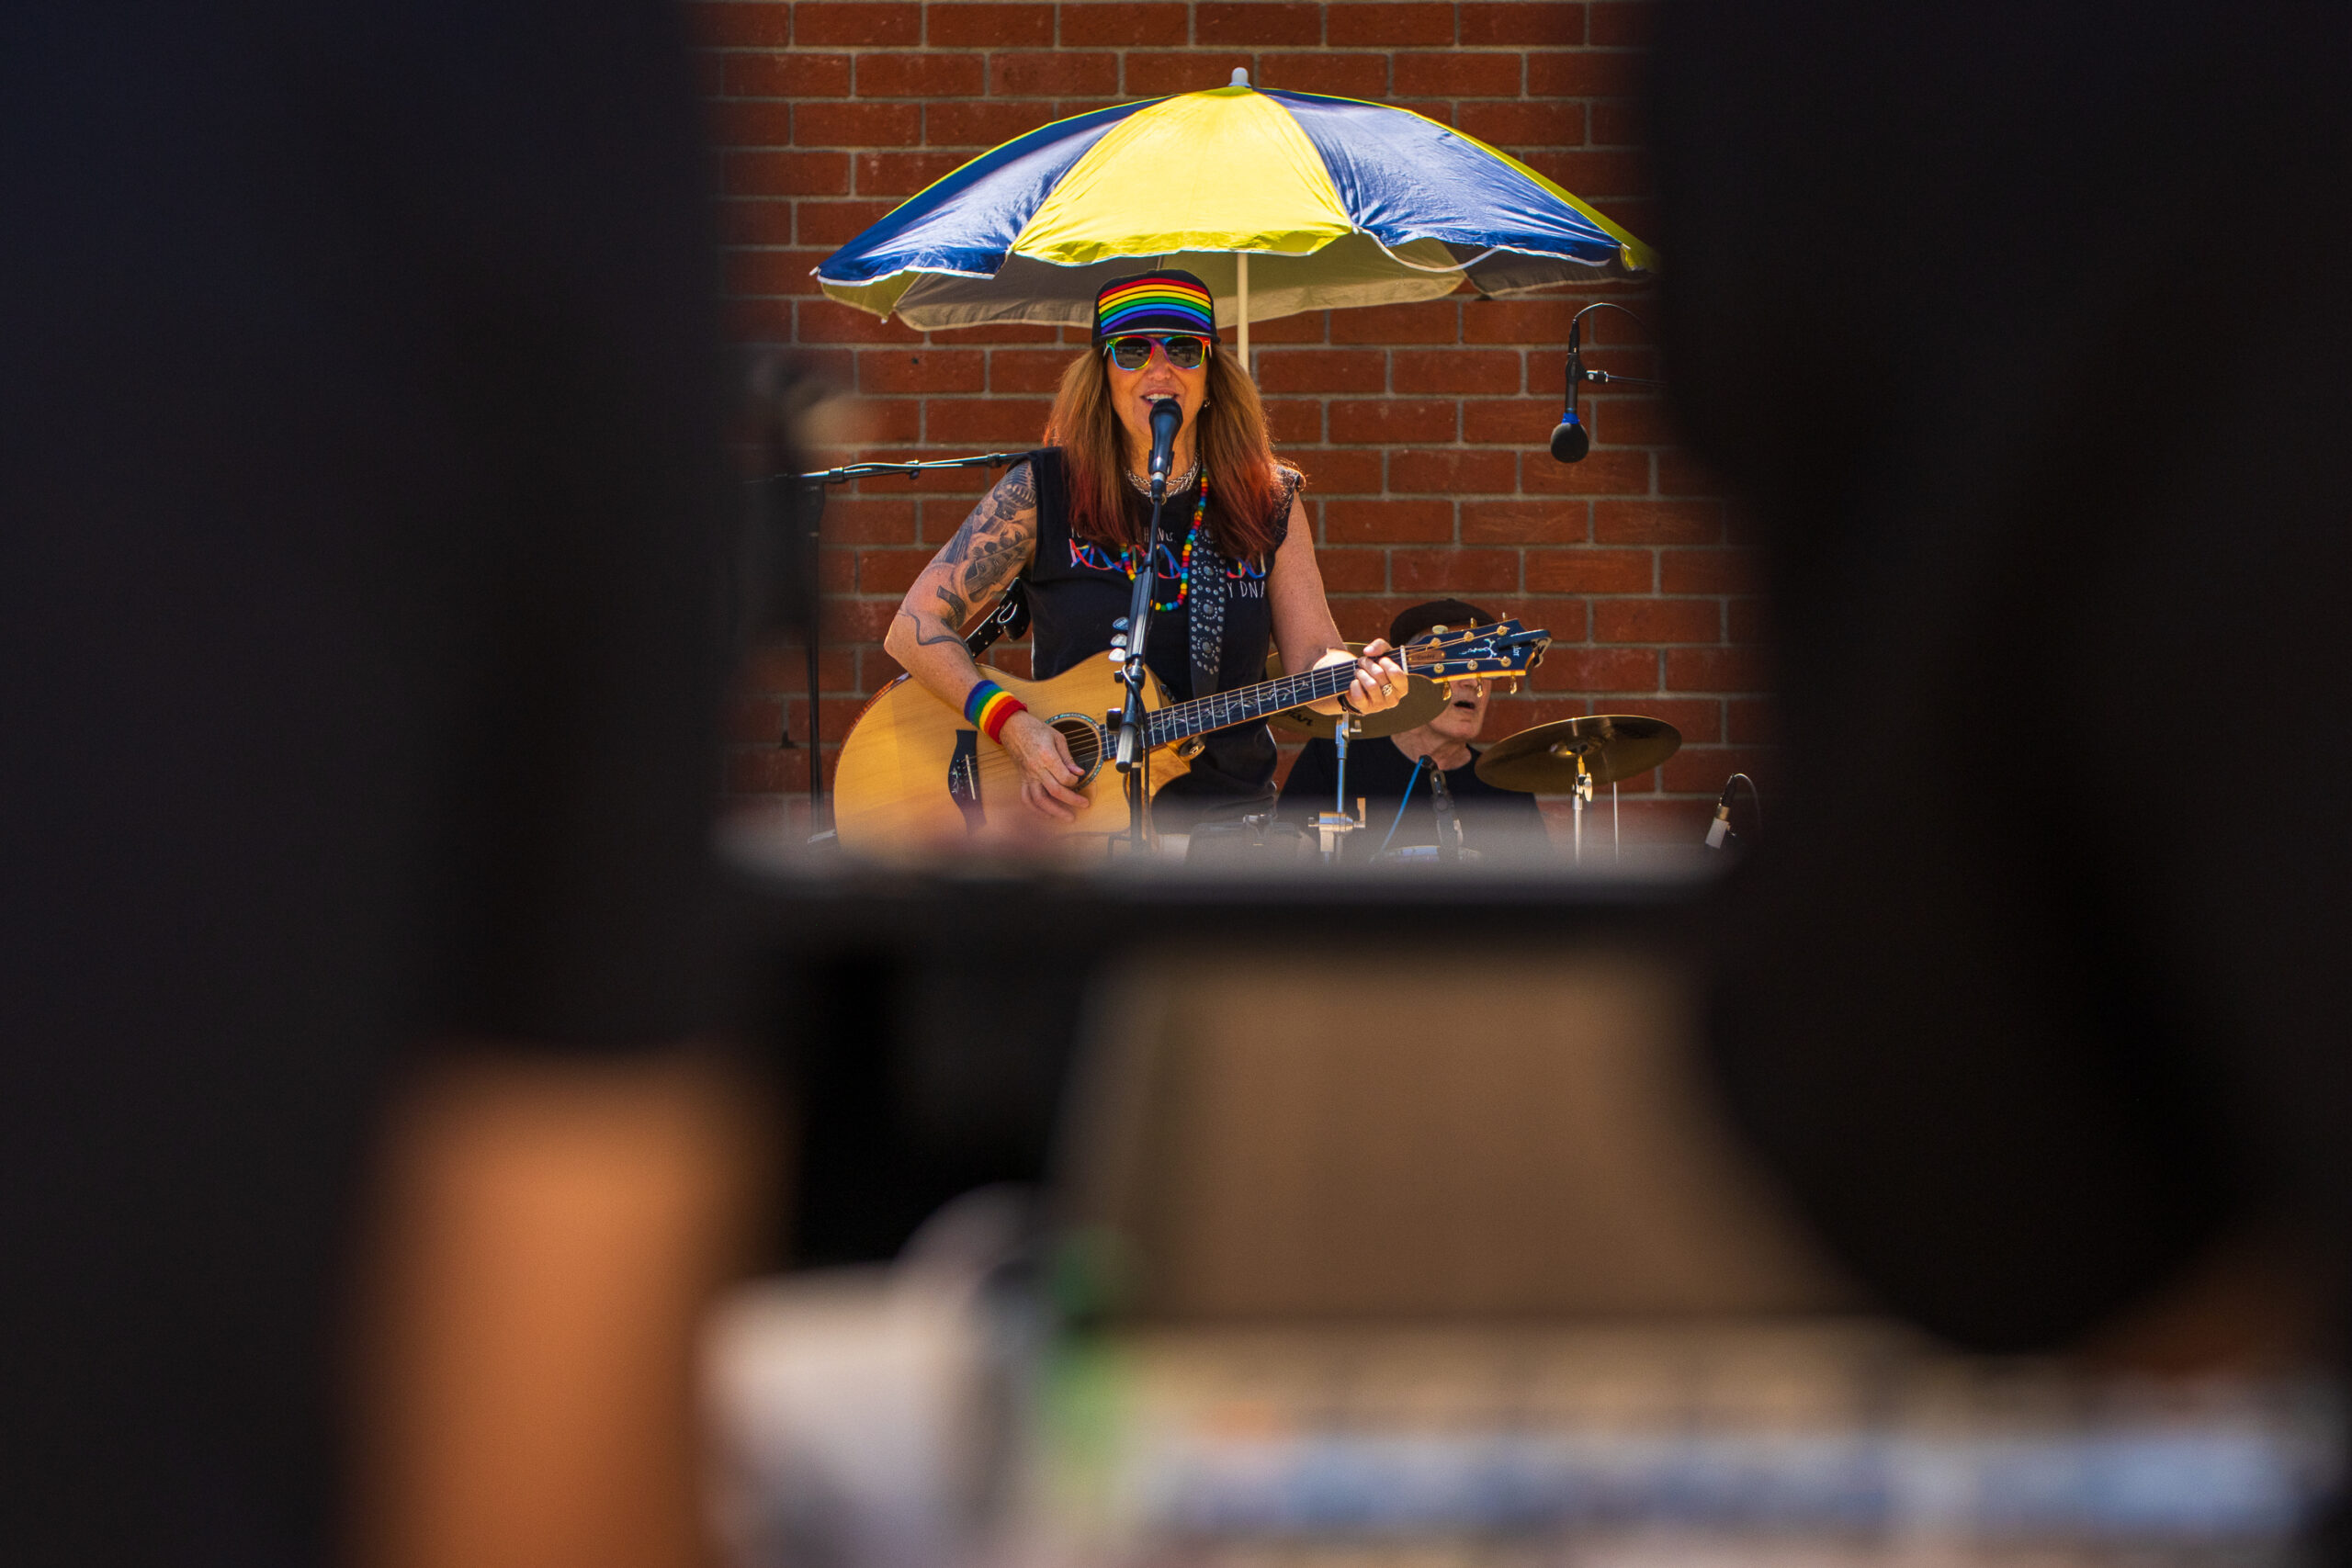 Long shot of woman wearing black trucker cap with rainbow and sleeveless black T-shirt plays acoustic guitar on stage taken from between two sound engineers and the mixing board.